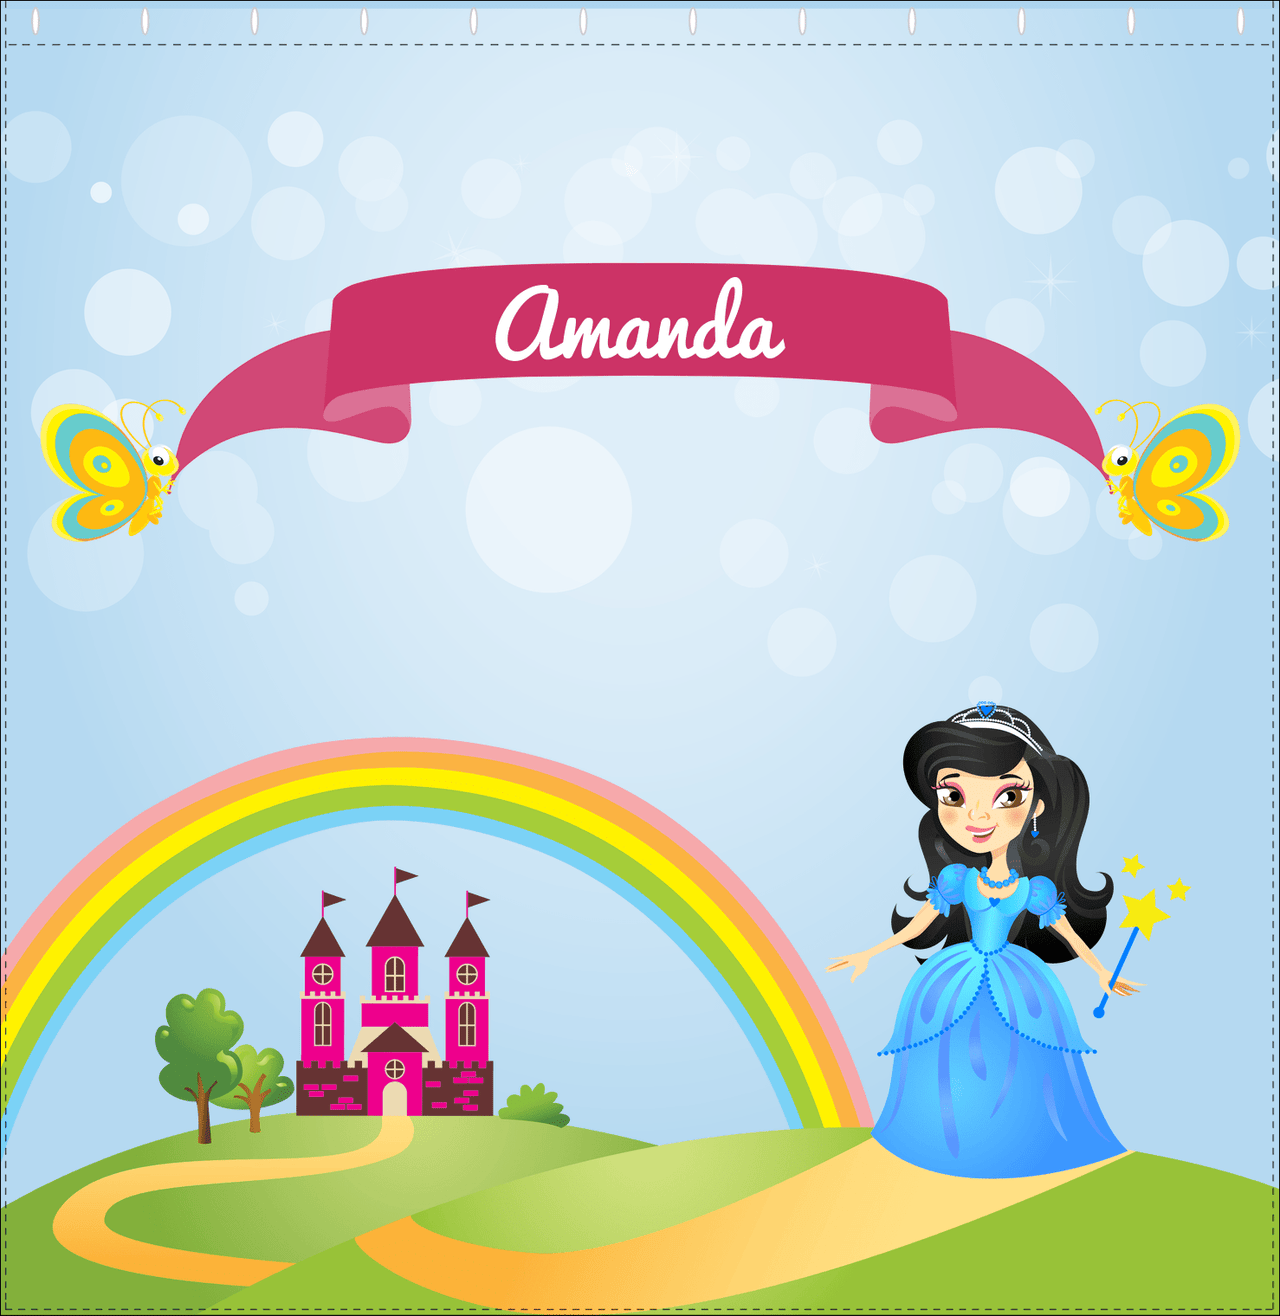 Personalized Princess Shower Curtain IV - Blue Background - Black Hair Princess - Decorate View